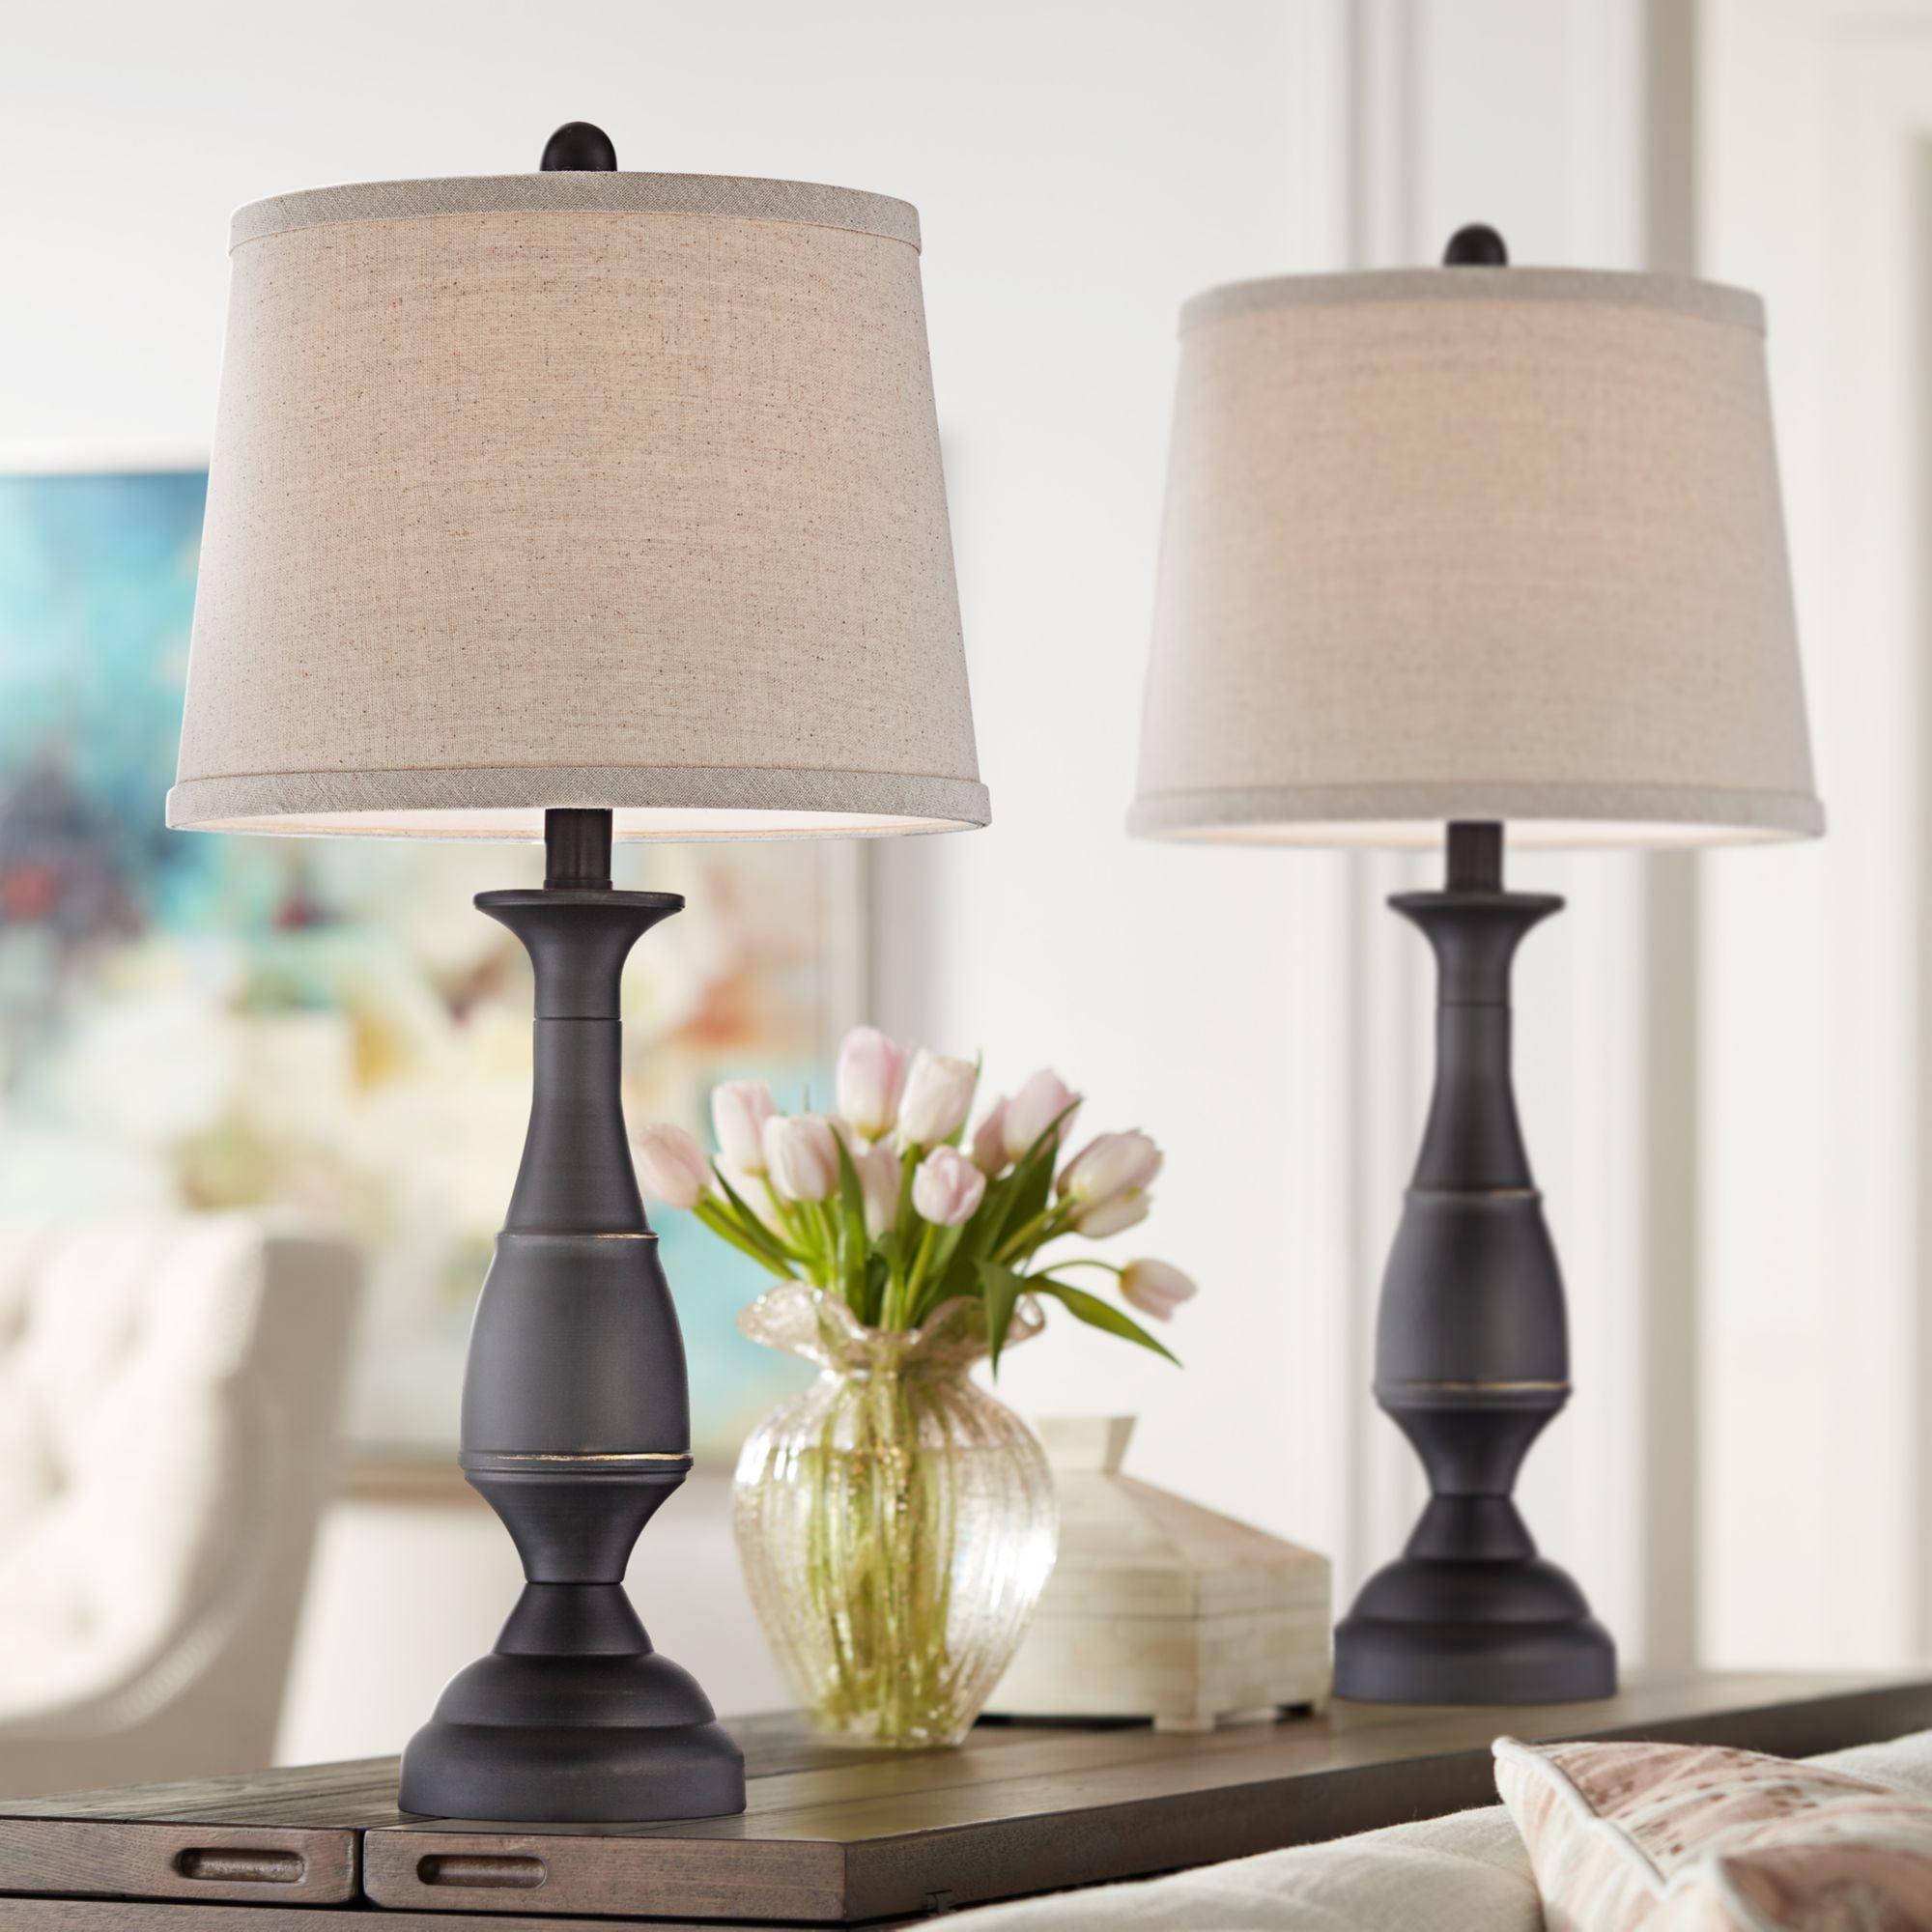 Regency Hill Traditional Table Lamps, Country Table Lamps For Living Room